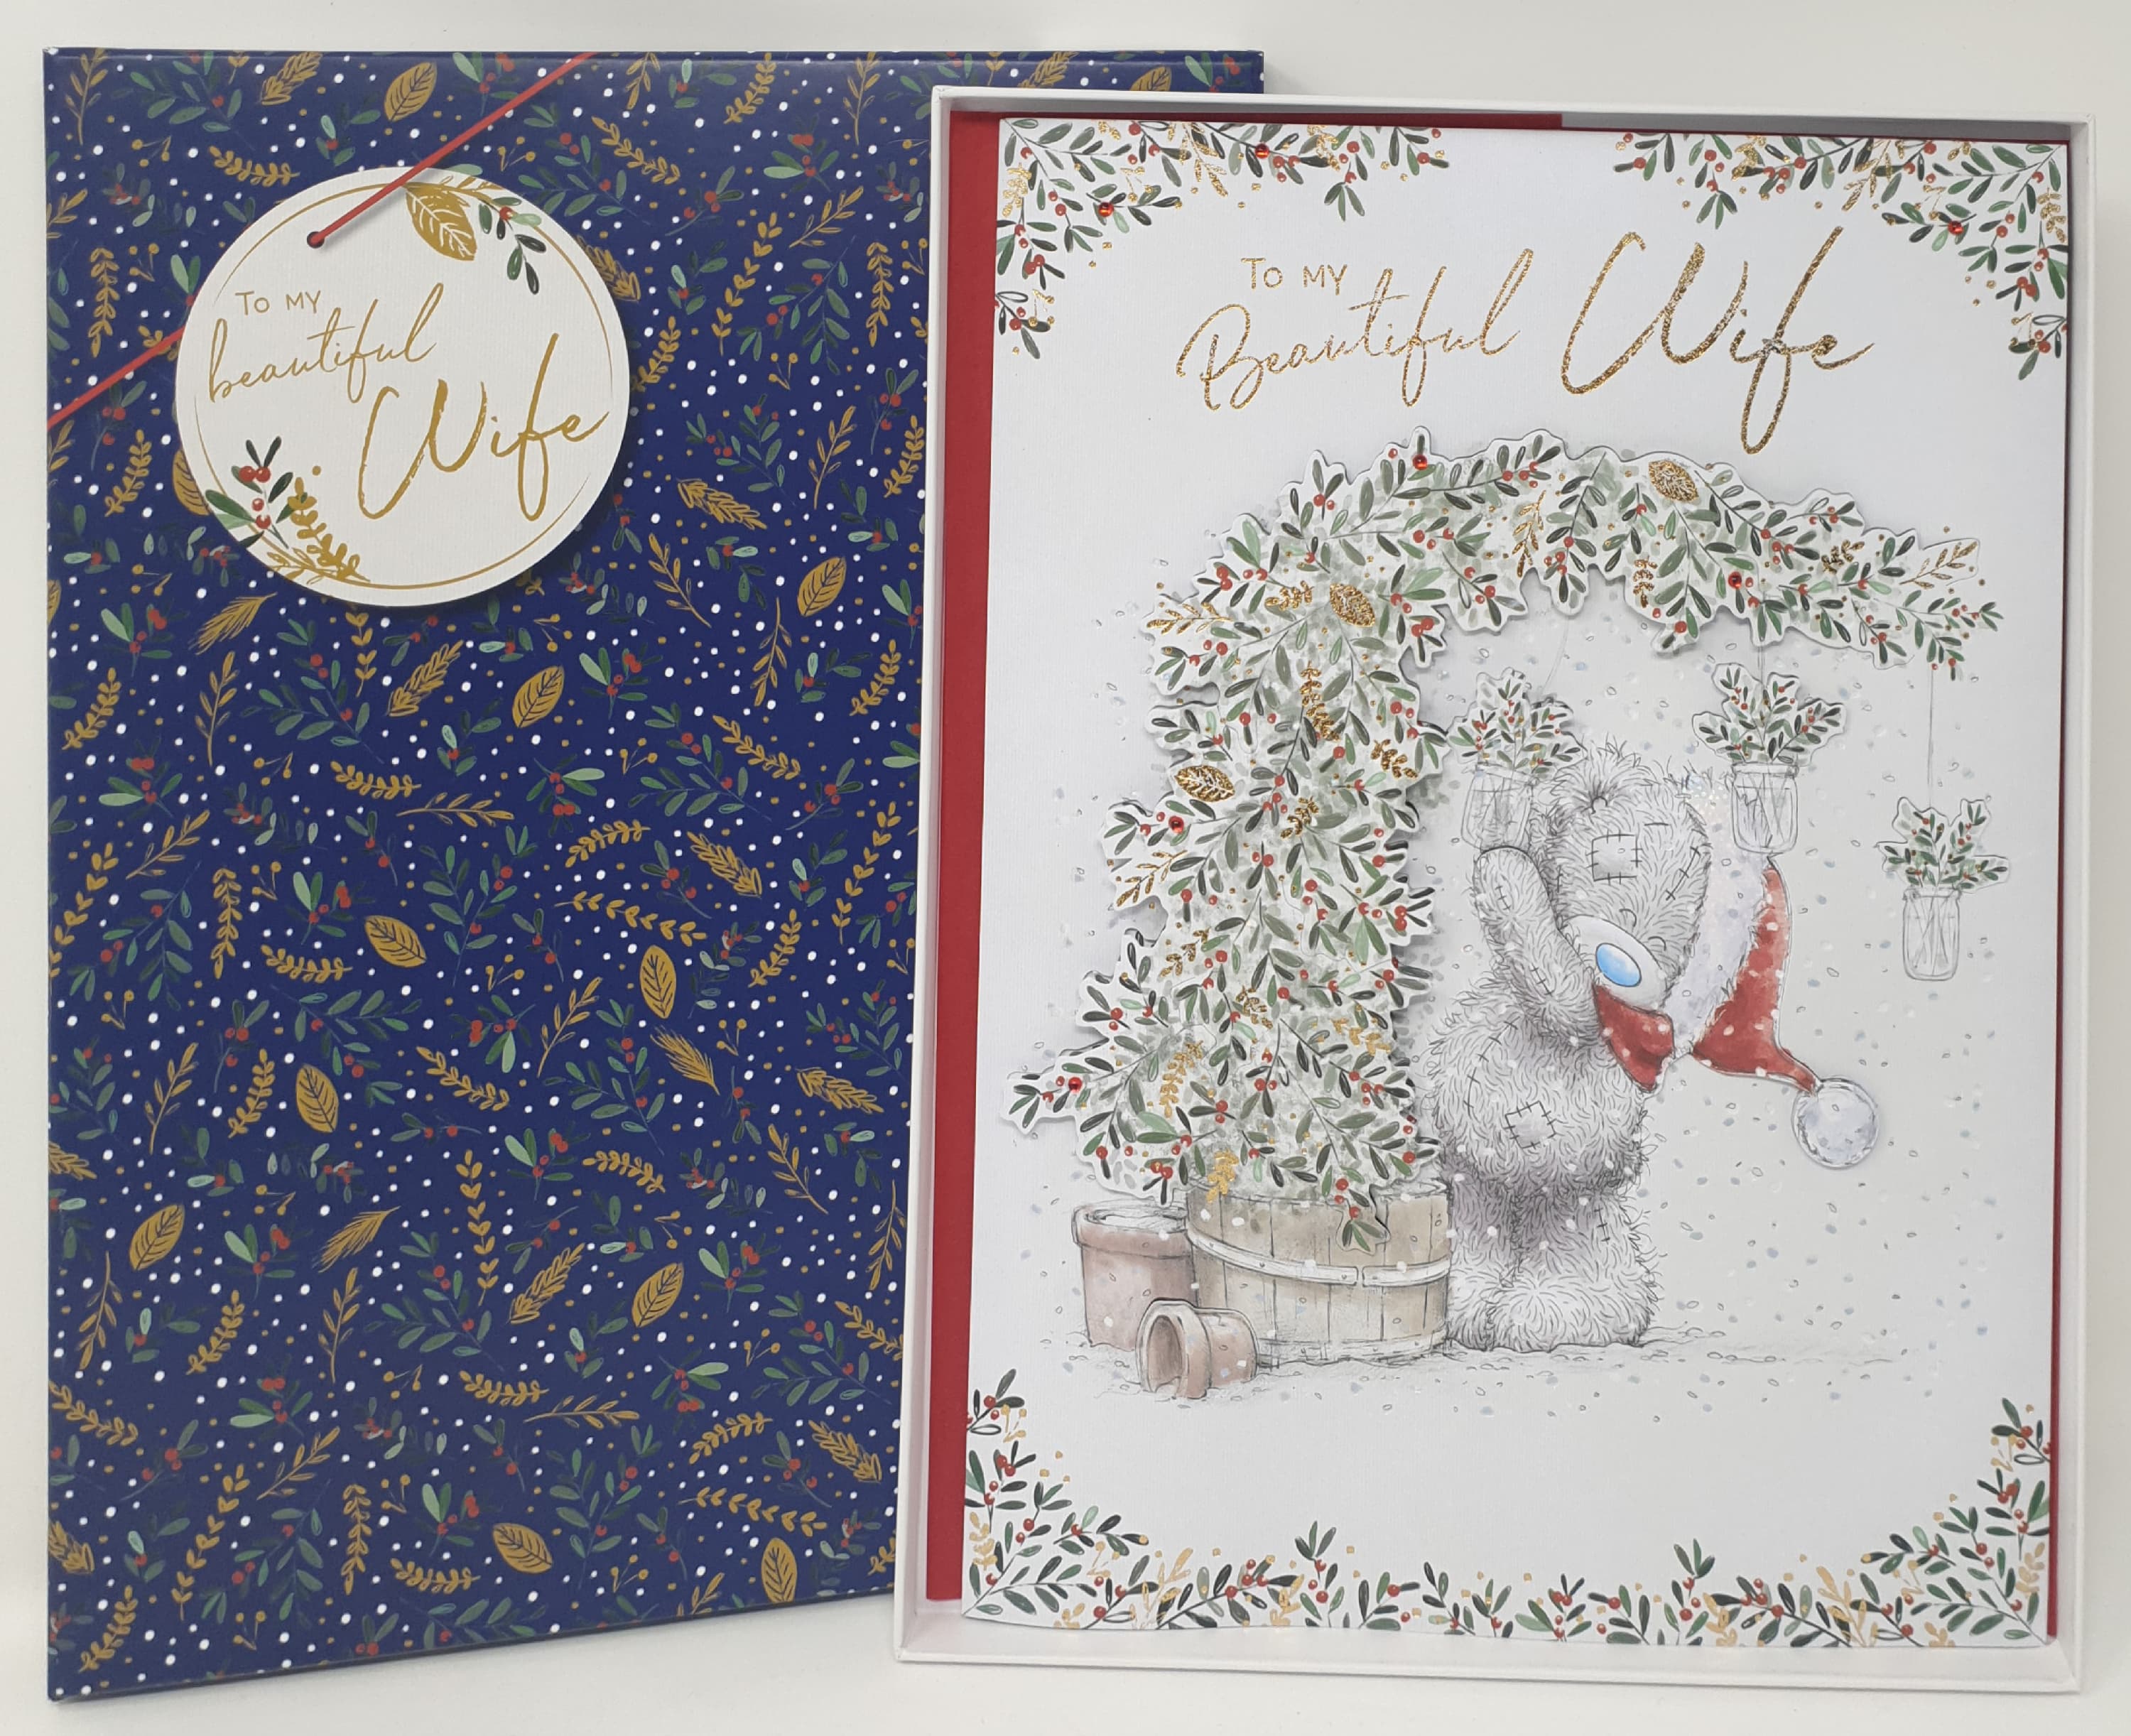 Wife Christmas Card / Teddy Bear Reaching to Decorate (Card In A Presentation Box)